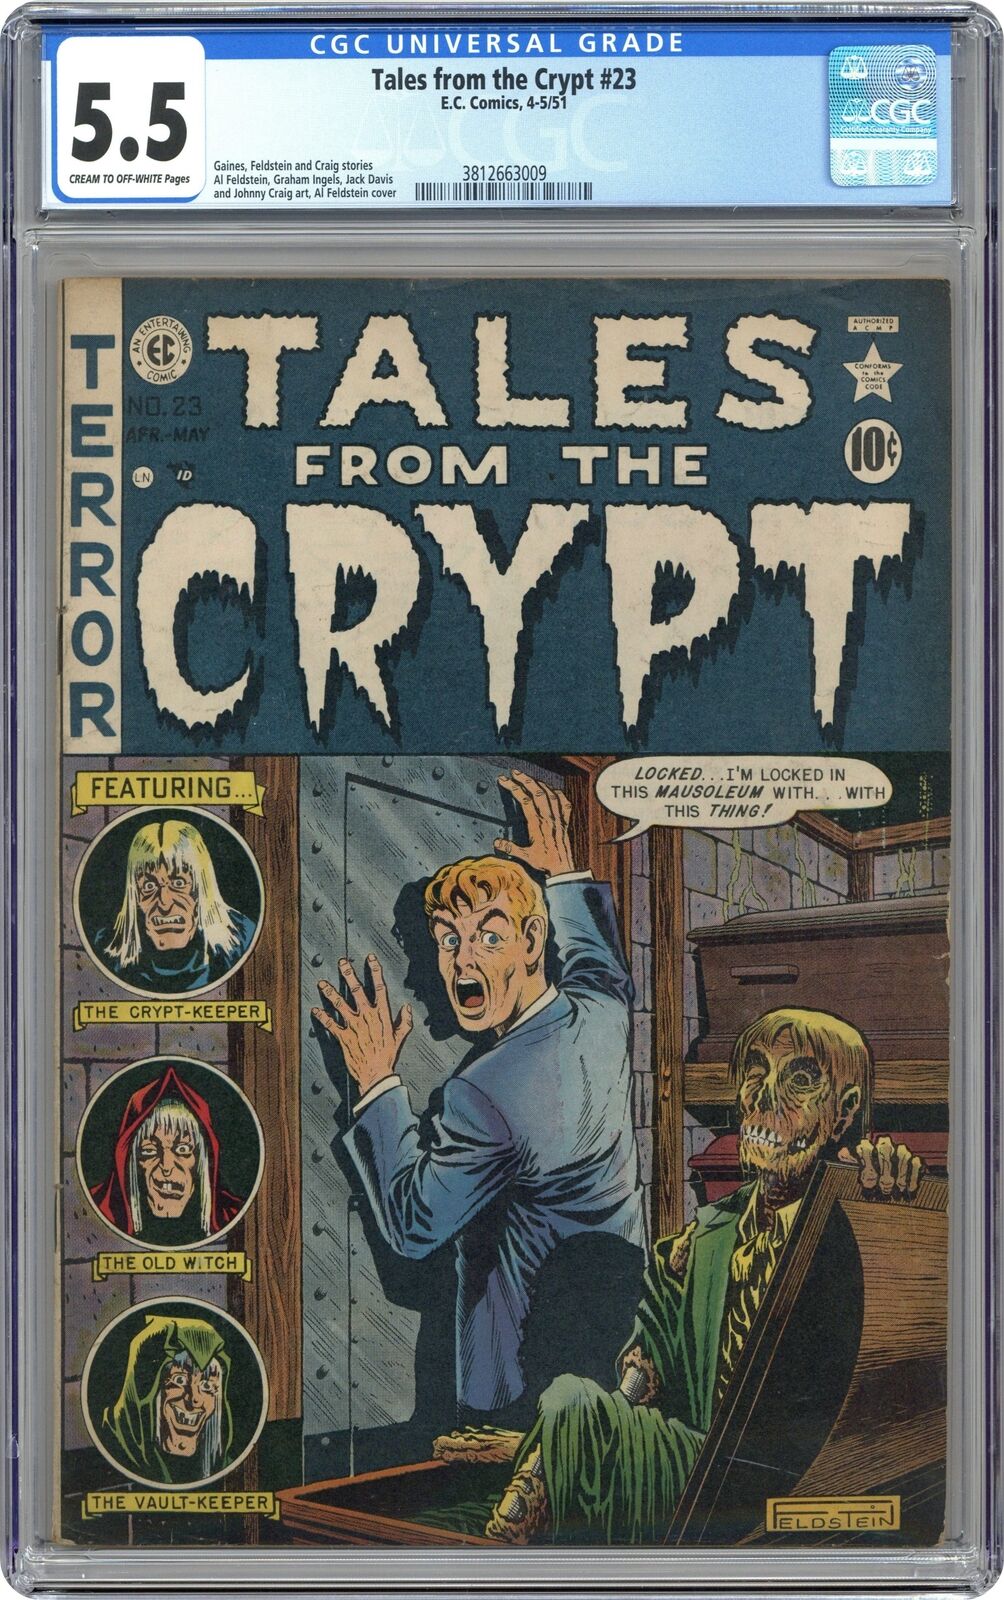 Tales from the Crypt #23 CGC 5.5 1951 3812663009